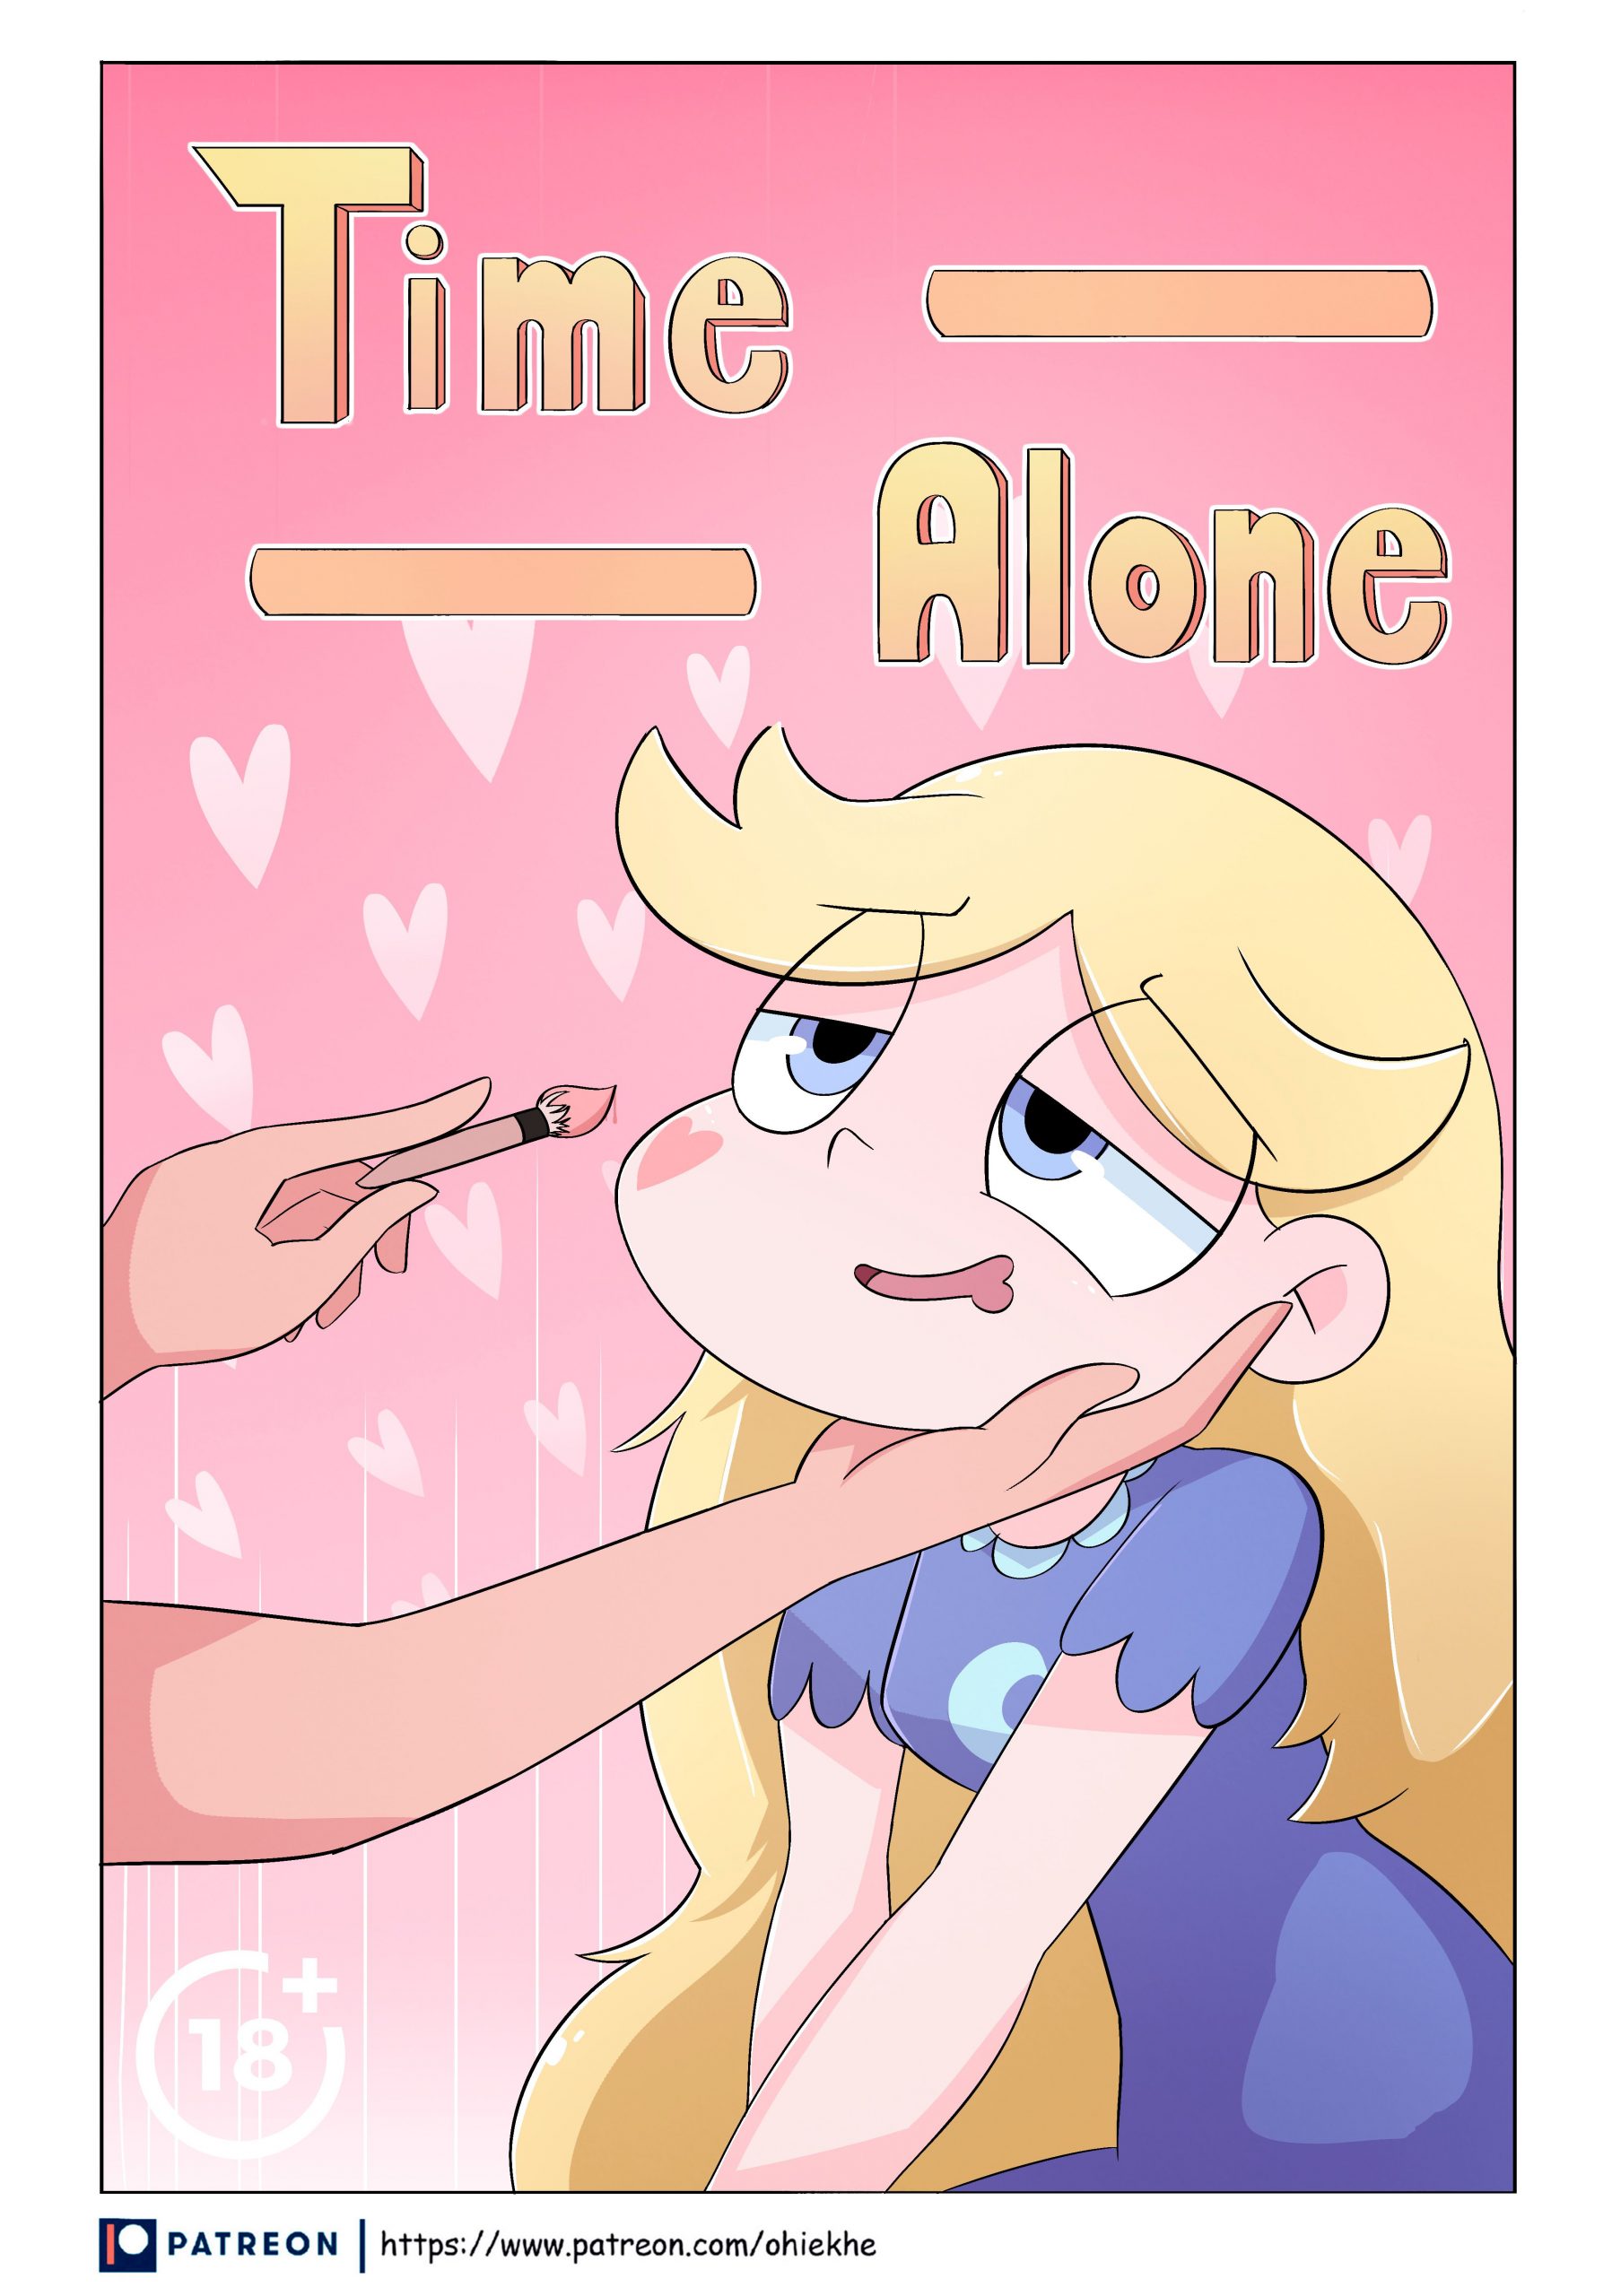 Atar vs the forces of evil porn comic